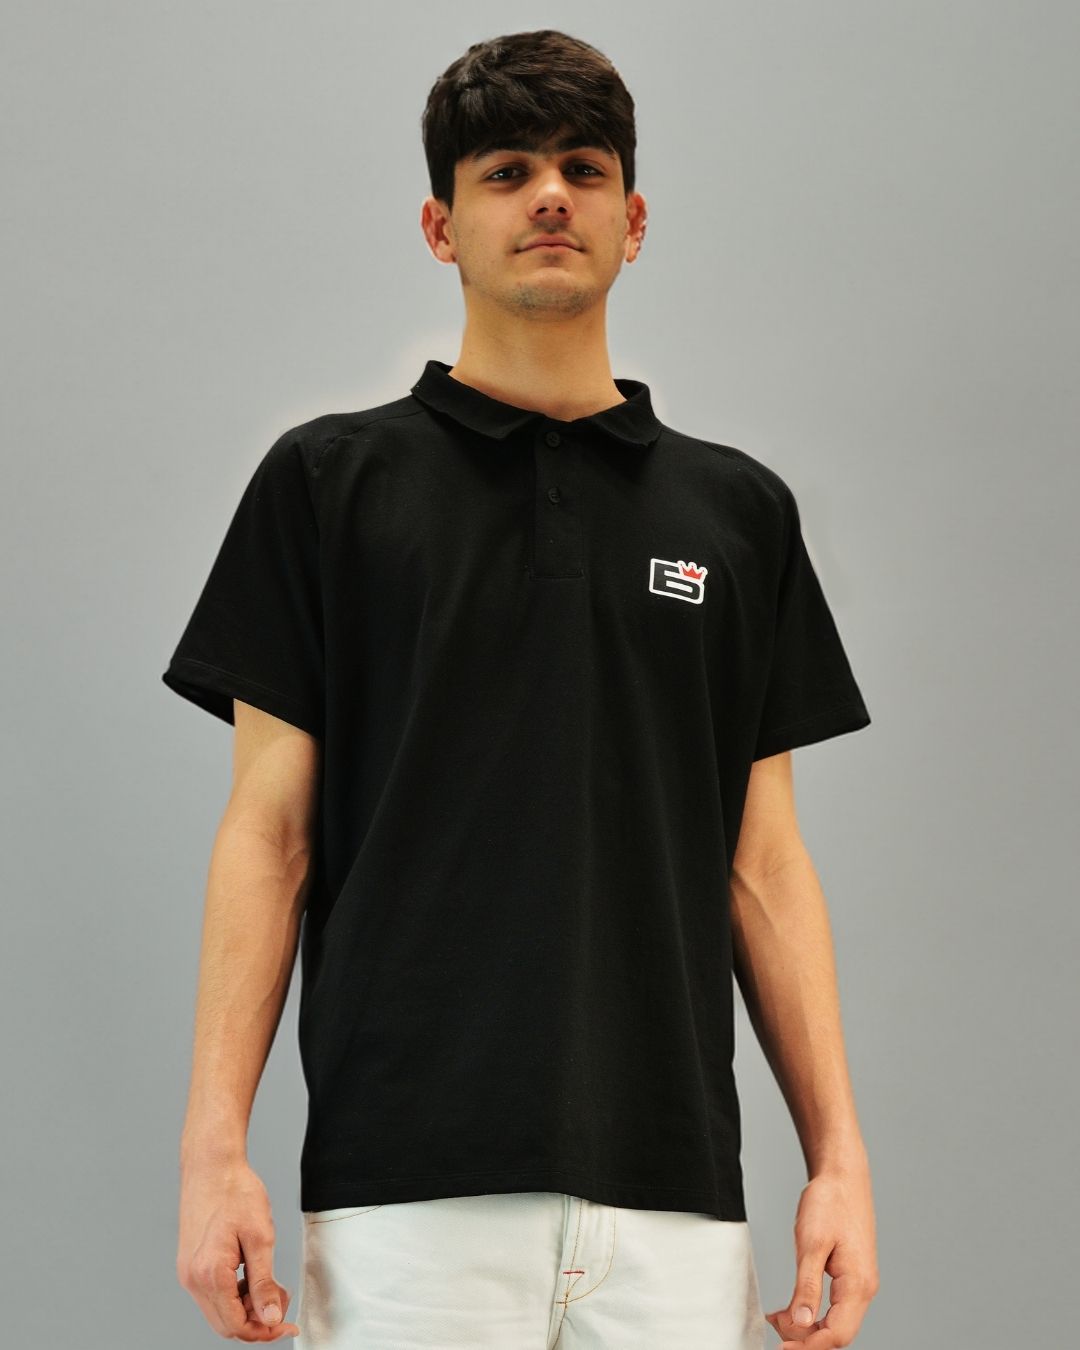 SOLOW BLACK - Polo